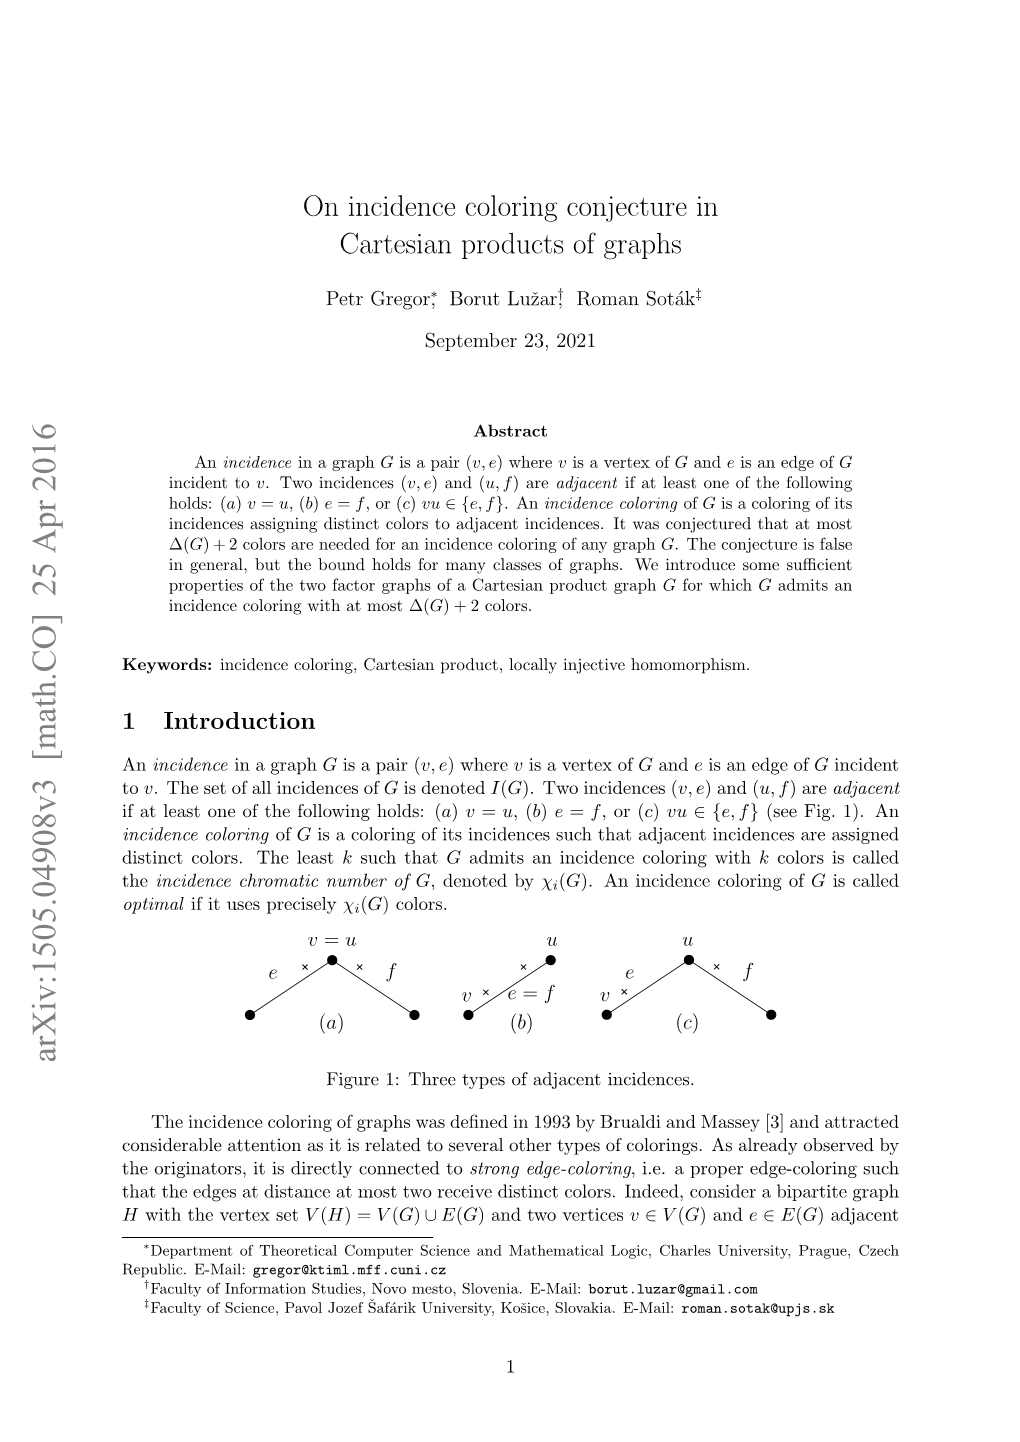 On Incidence Coloring Conjecture in Cartesian Products of Graphs